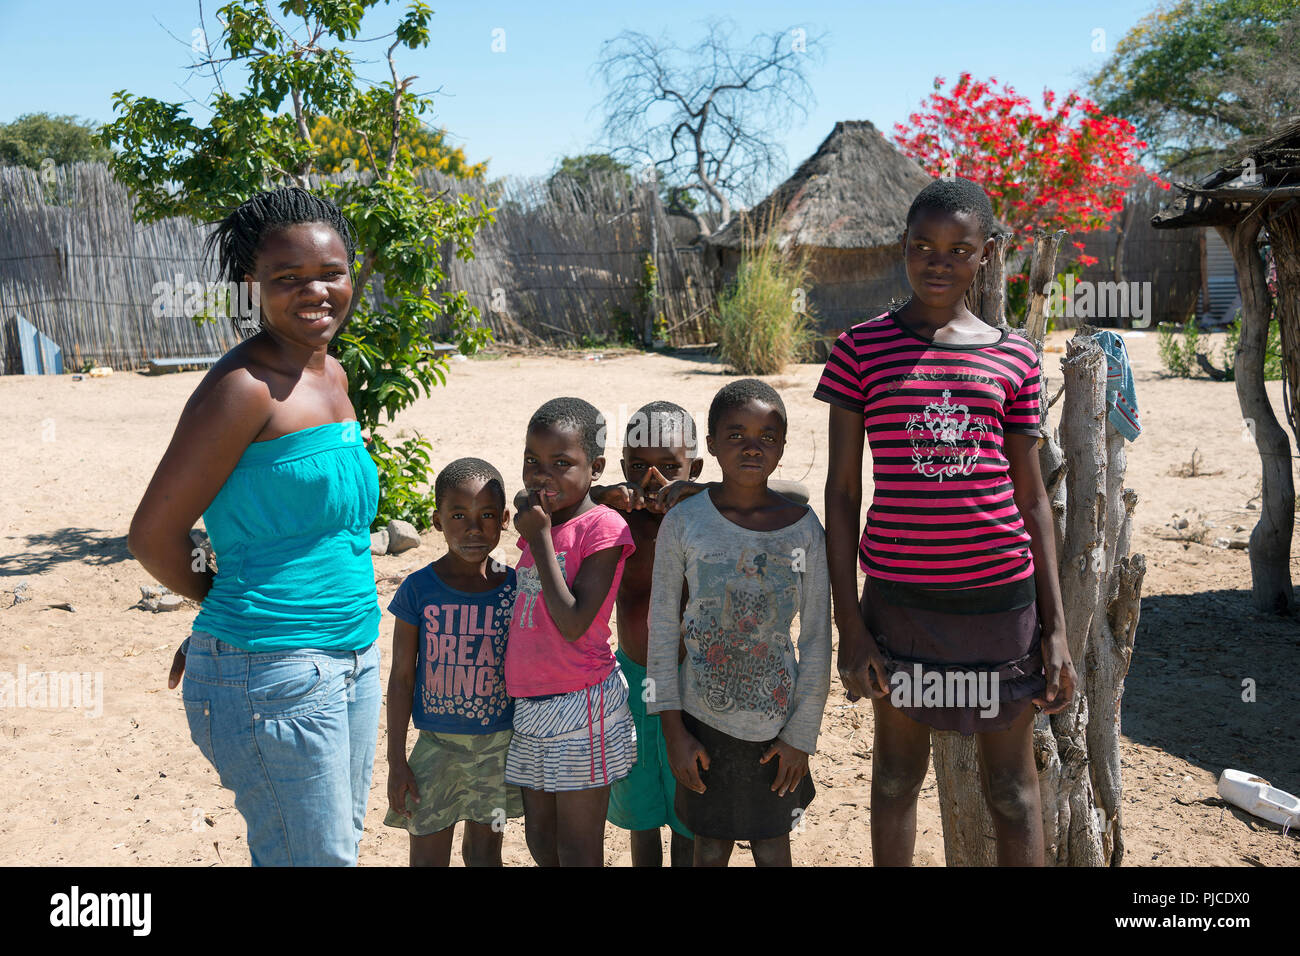 Children and youngsters, Ndiyona, Namibia, Kinder und Jugendliche Stock Photo